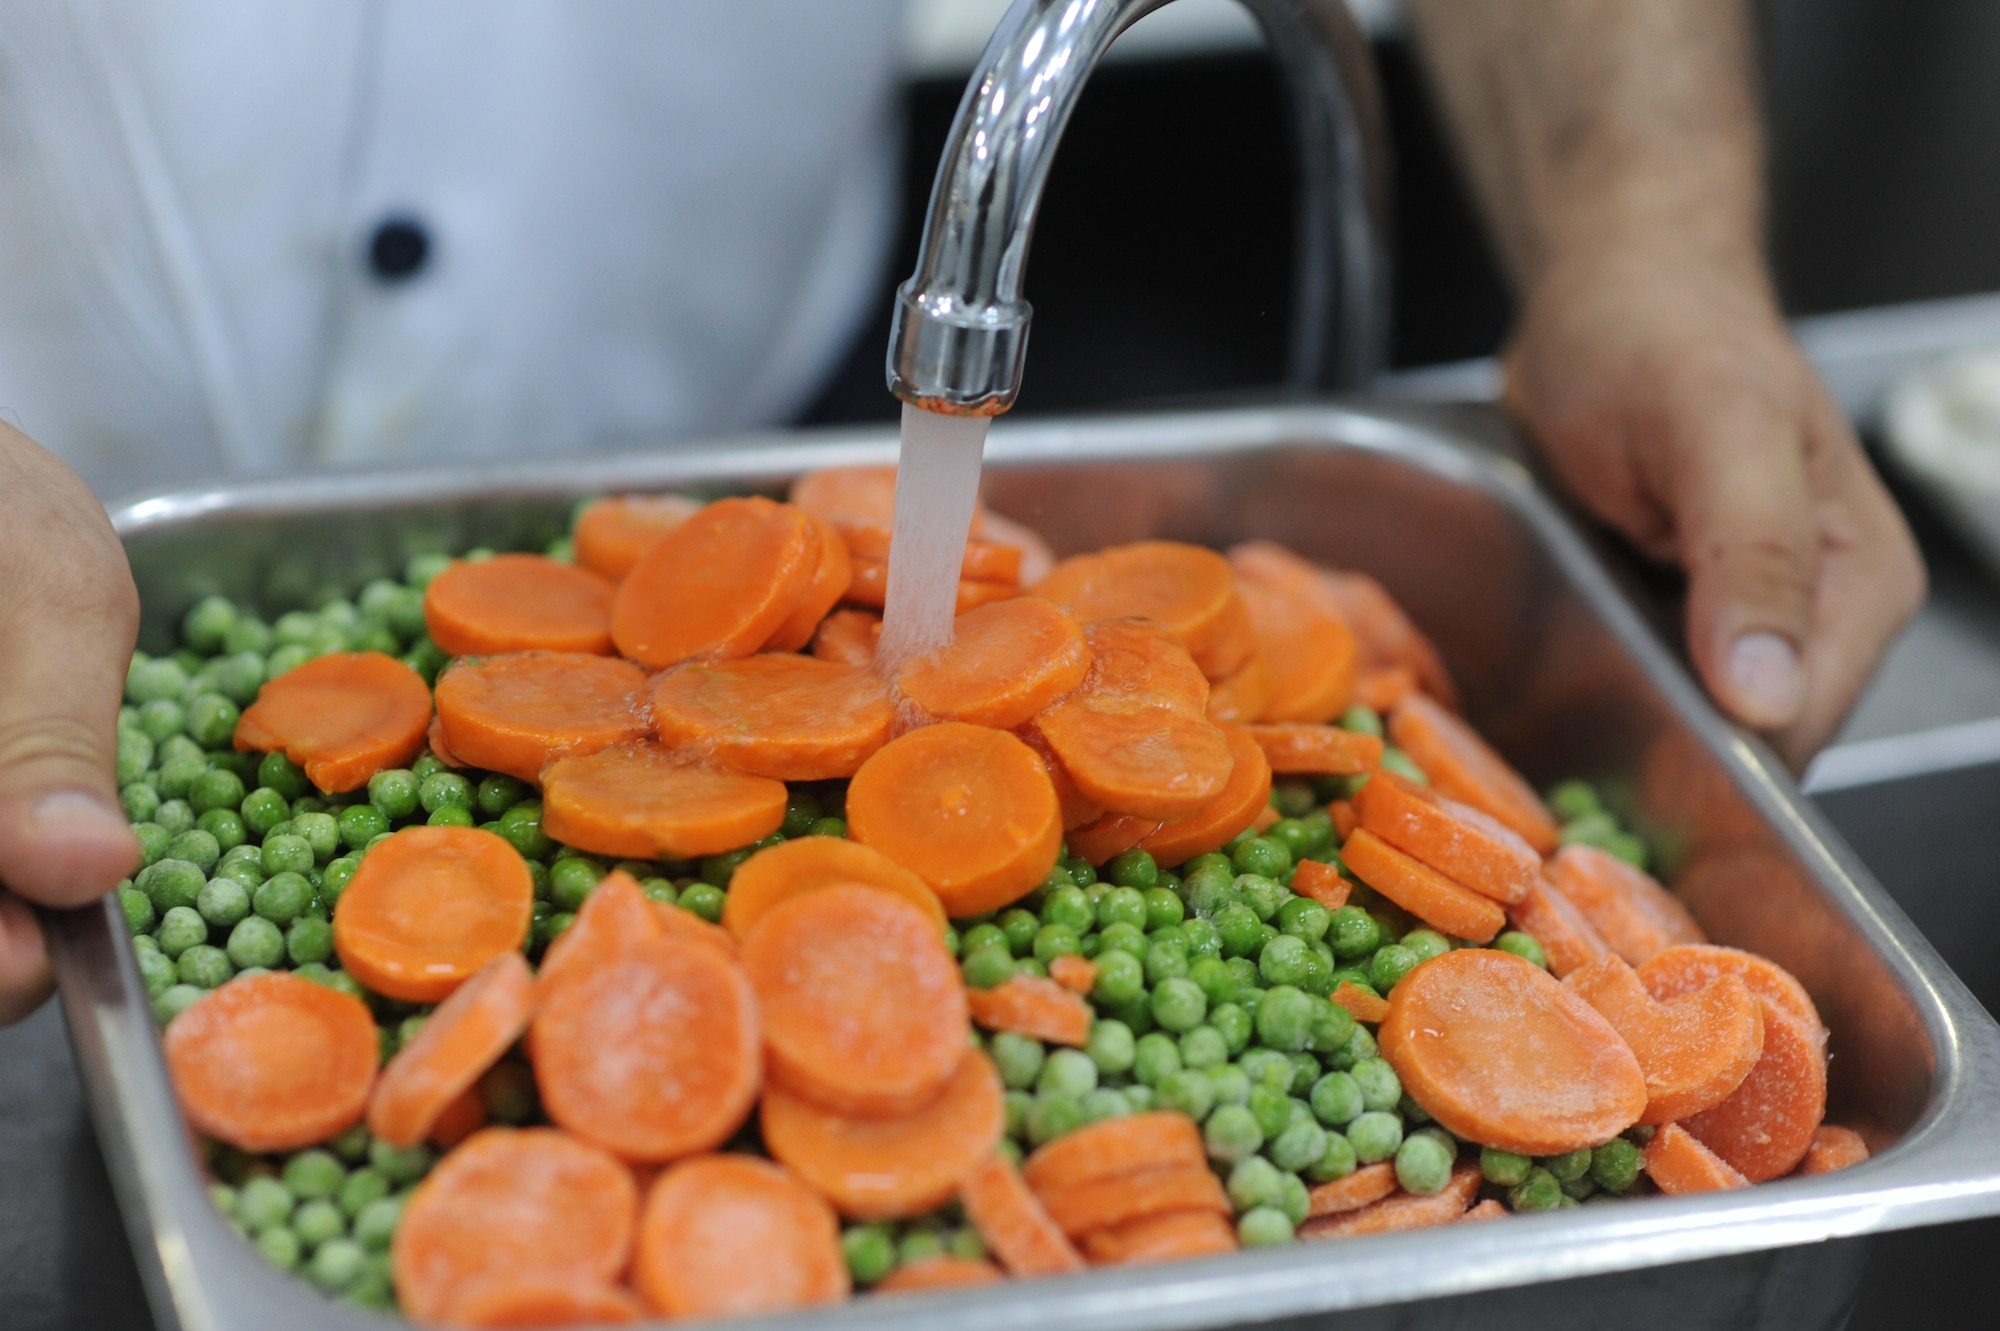 Frozen peas and carrots are rinsed off and prepared to be cooked July 27, 2012,  at the Sultan's Inn Dining Facility at Incirlik Air Base, Turkey. The Sultan's Inn offers breakfast, lunch dinner and early breakfast on weekends. (U.S. Air Force photo by Senior Airman William A. O'Brien/Released) 